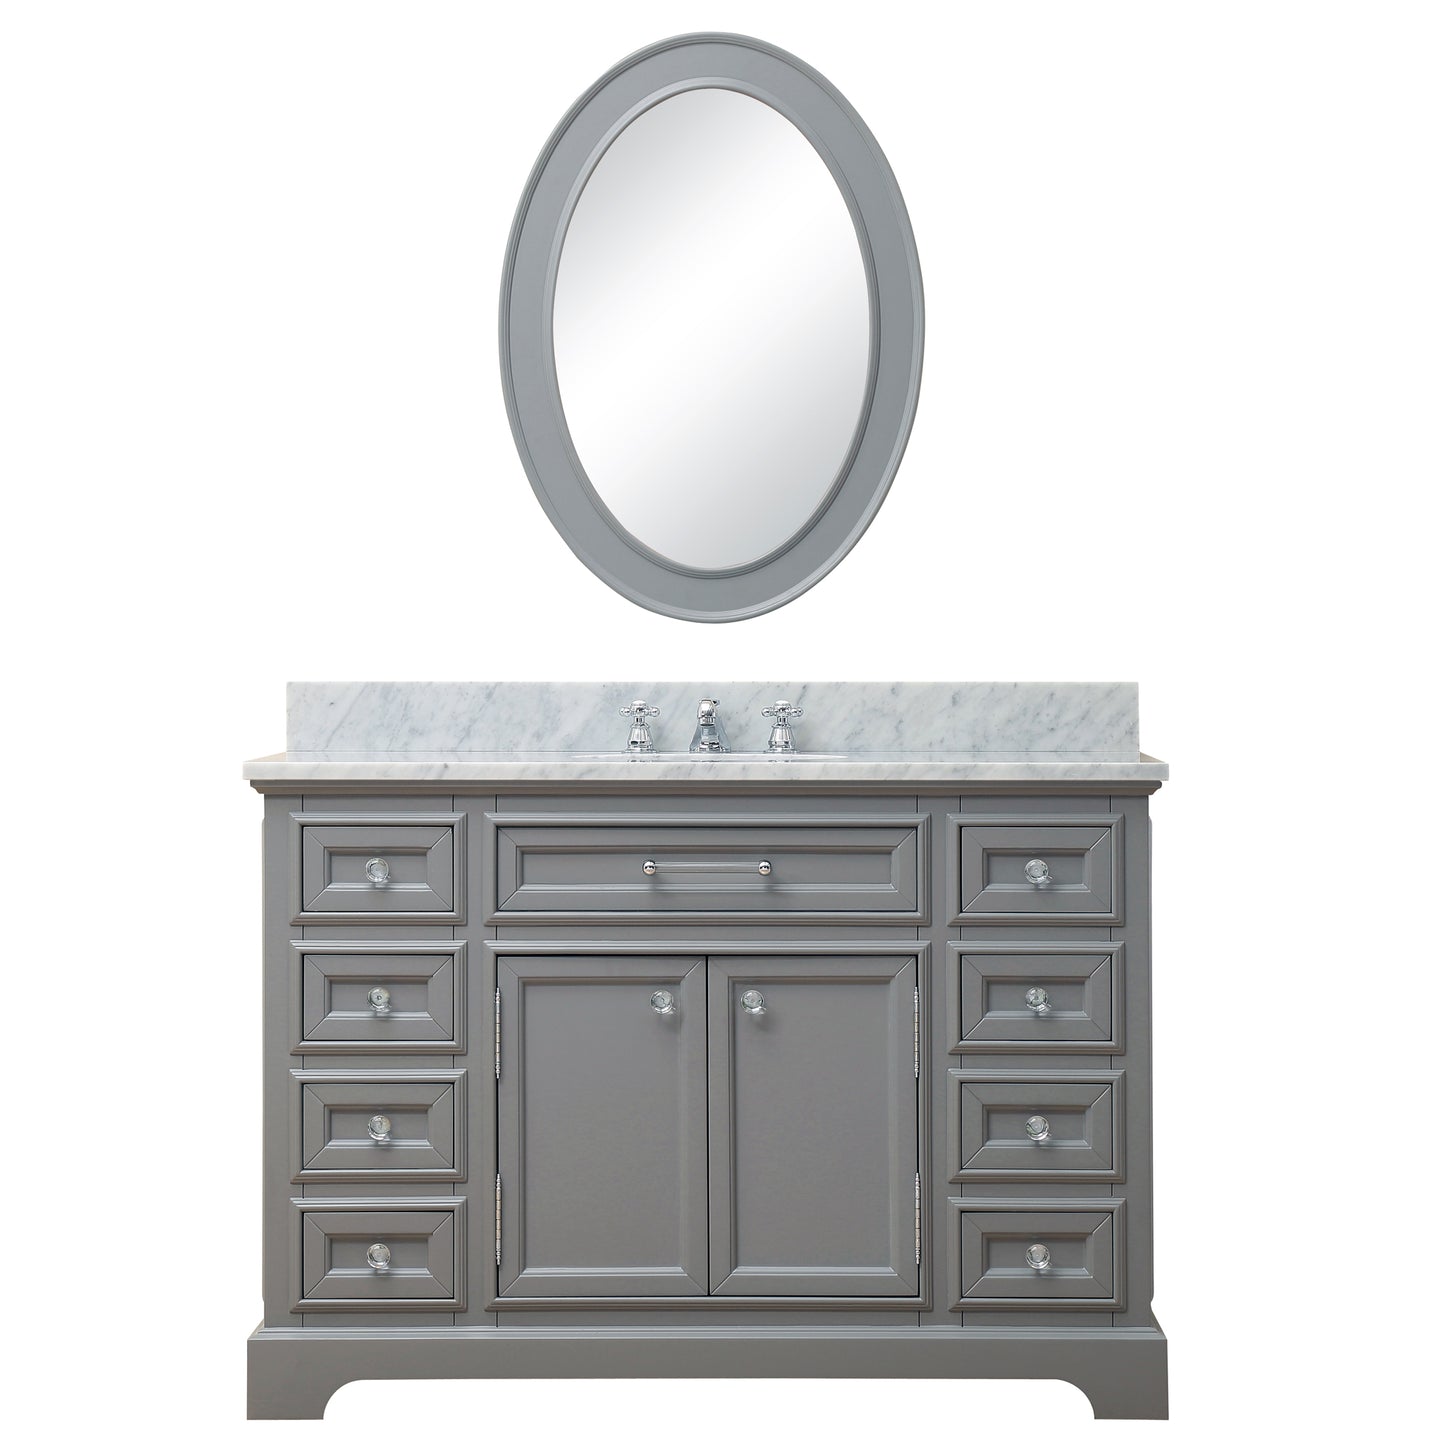 Water Creation Derby 48 Inch Single Sink Bathroom Vanity With Matching Framed Mirror And Faucet - Luxe Bathroom Vanities